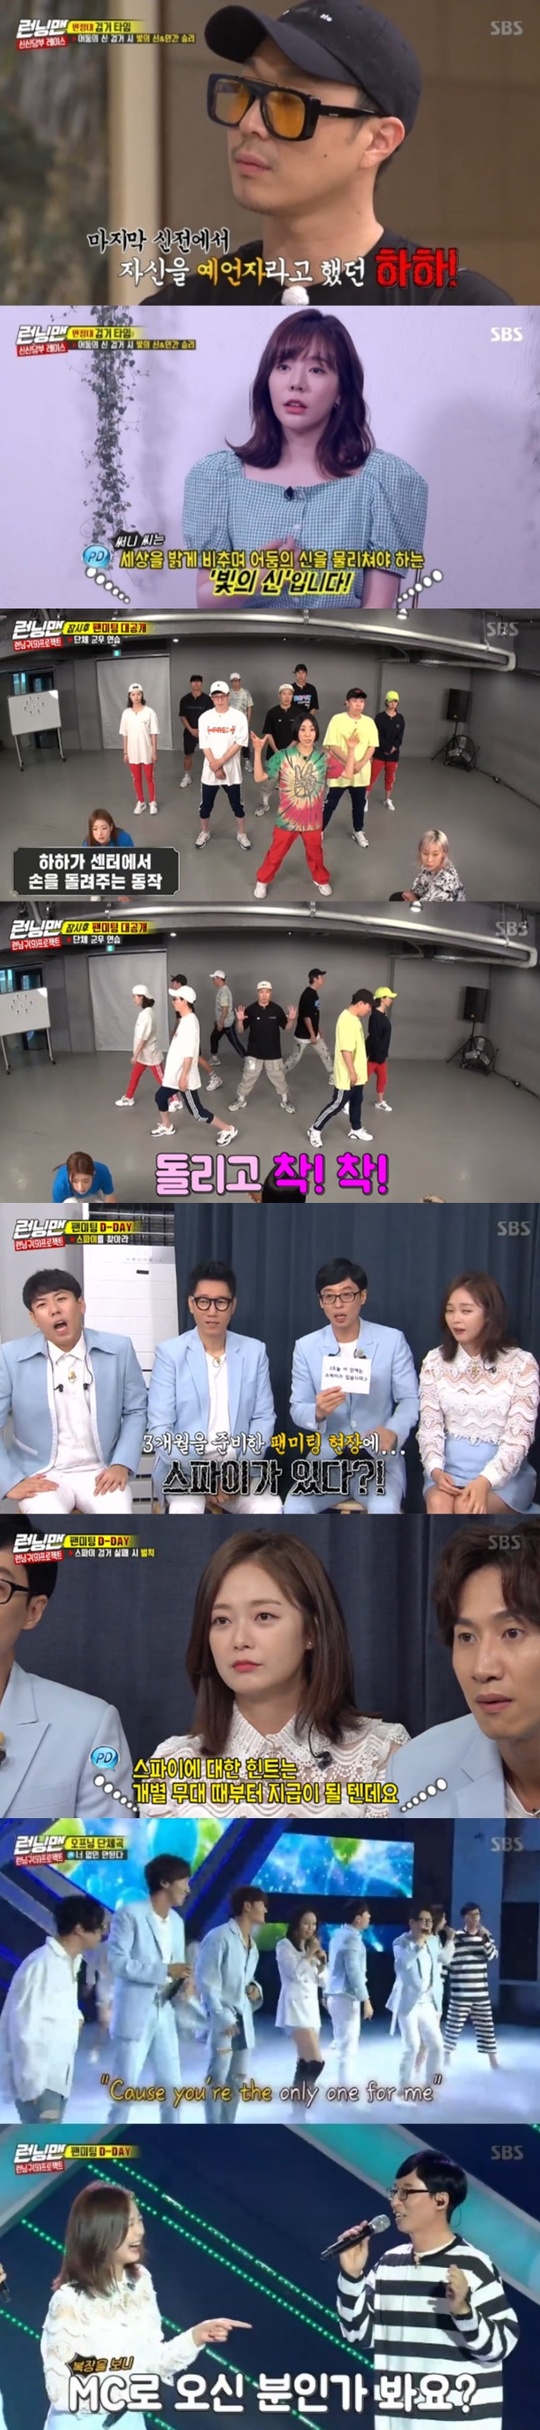 Running Man Nine-year anniversary fan meeting T-Shirt feature was released.According to Nielsen Korea, a TV viewer rating research agency, SBS Running Man, which was broadcast on September 8, recorded 3.2% (based on the second part of the TV viewer ratings of the metropolitan area) which is an important indicator of major advertising officials, which is higher than last week. He kept the top spot.The final results of the race of the couple, Shin Shin-dang, following last week, were released on the show.Girls Generation Sunny, singer Stern, actor Kim Yewon, and Jang Yewon announcer appeared and a psychological exhibition of light god, dark god, human beings was held.The members realized that the god of darkness could be a prophet during the reasoning, and raised Haha as the god of darkness in the final judgment.Haha was the god of darkness, Sunny was the god of light, and the god of light and human team won.In addition, the first domestic fan meeting T-Shirt in Running Mans history was also released for the first time on the show.The members sweated to show group dance and couple dance to be presented at fan meetings, and they felt a great burden.Eventually, the day came, and the members greeted 2,500 fans.But for a moment everyone was happy to see the crew released a mission to find Spy. The members were embarrassed to say that they had to find Spy as well as stage performances.Audiences were aware of Spys Identity, and the crew said they offer individual hints with the audiences shouts.On the other hand, the opening of T-Shirt was decorated Running Manly.Through the opening mission, Yo Jae-Sukman appeared on stage wearing prison uniforms, and the rest of the members dressed up in wonderful opening costumes and performed the opening performance of No You.The scene was the best TV viewer ratings per minute with 7.8%.Park Su-in